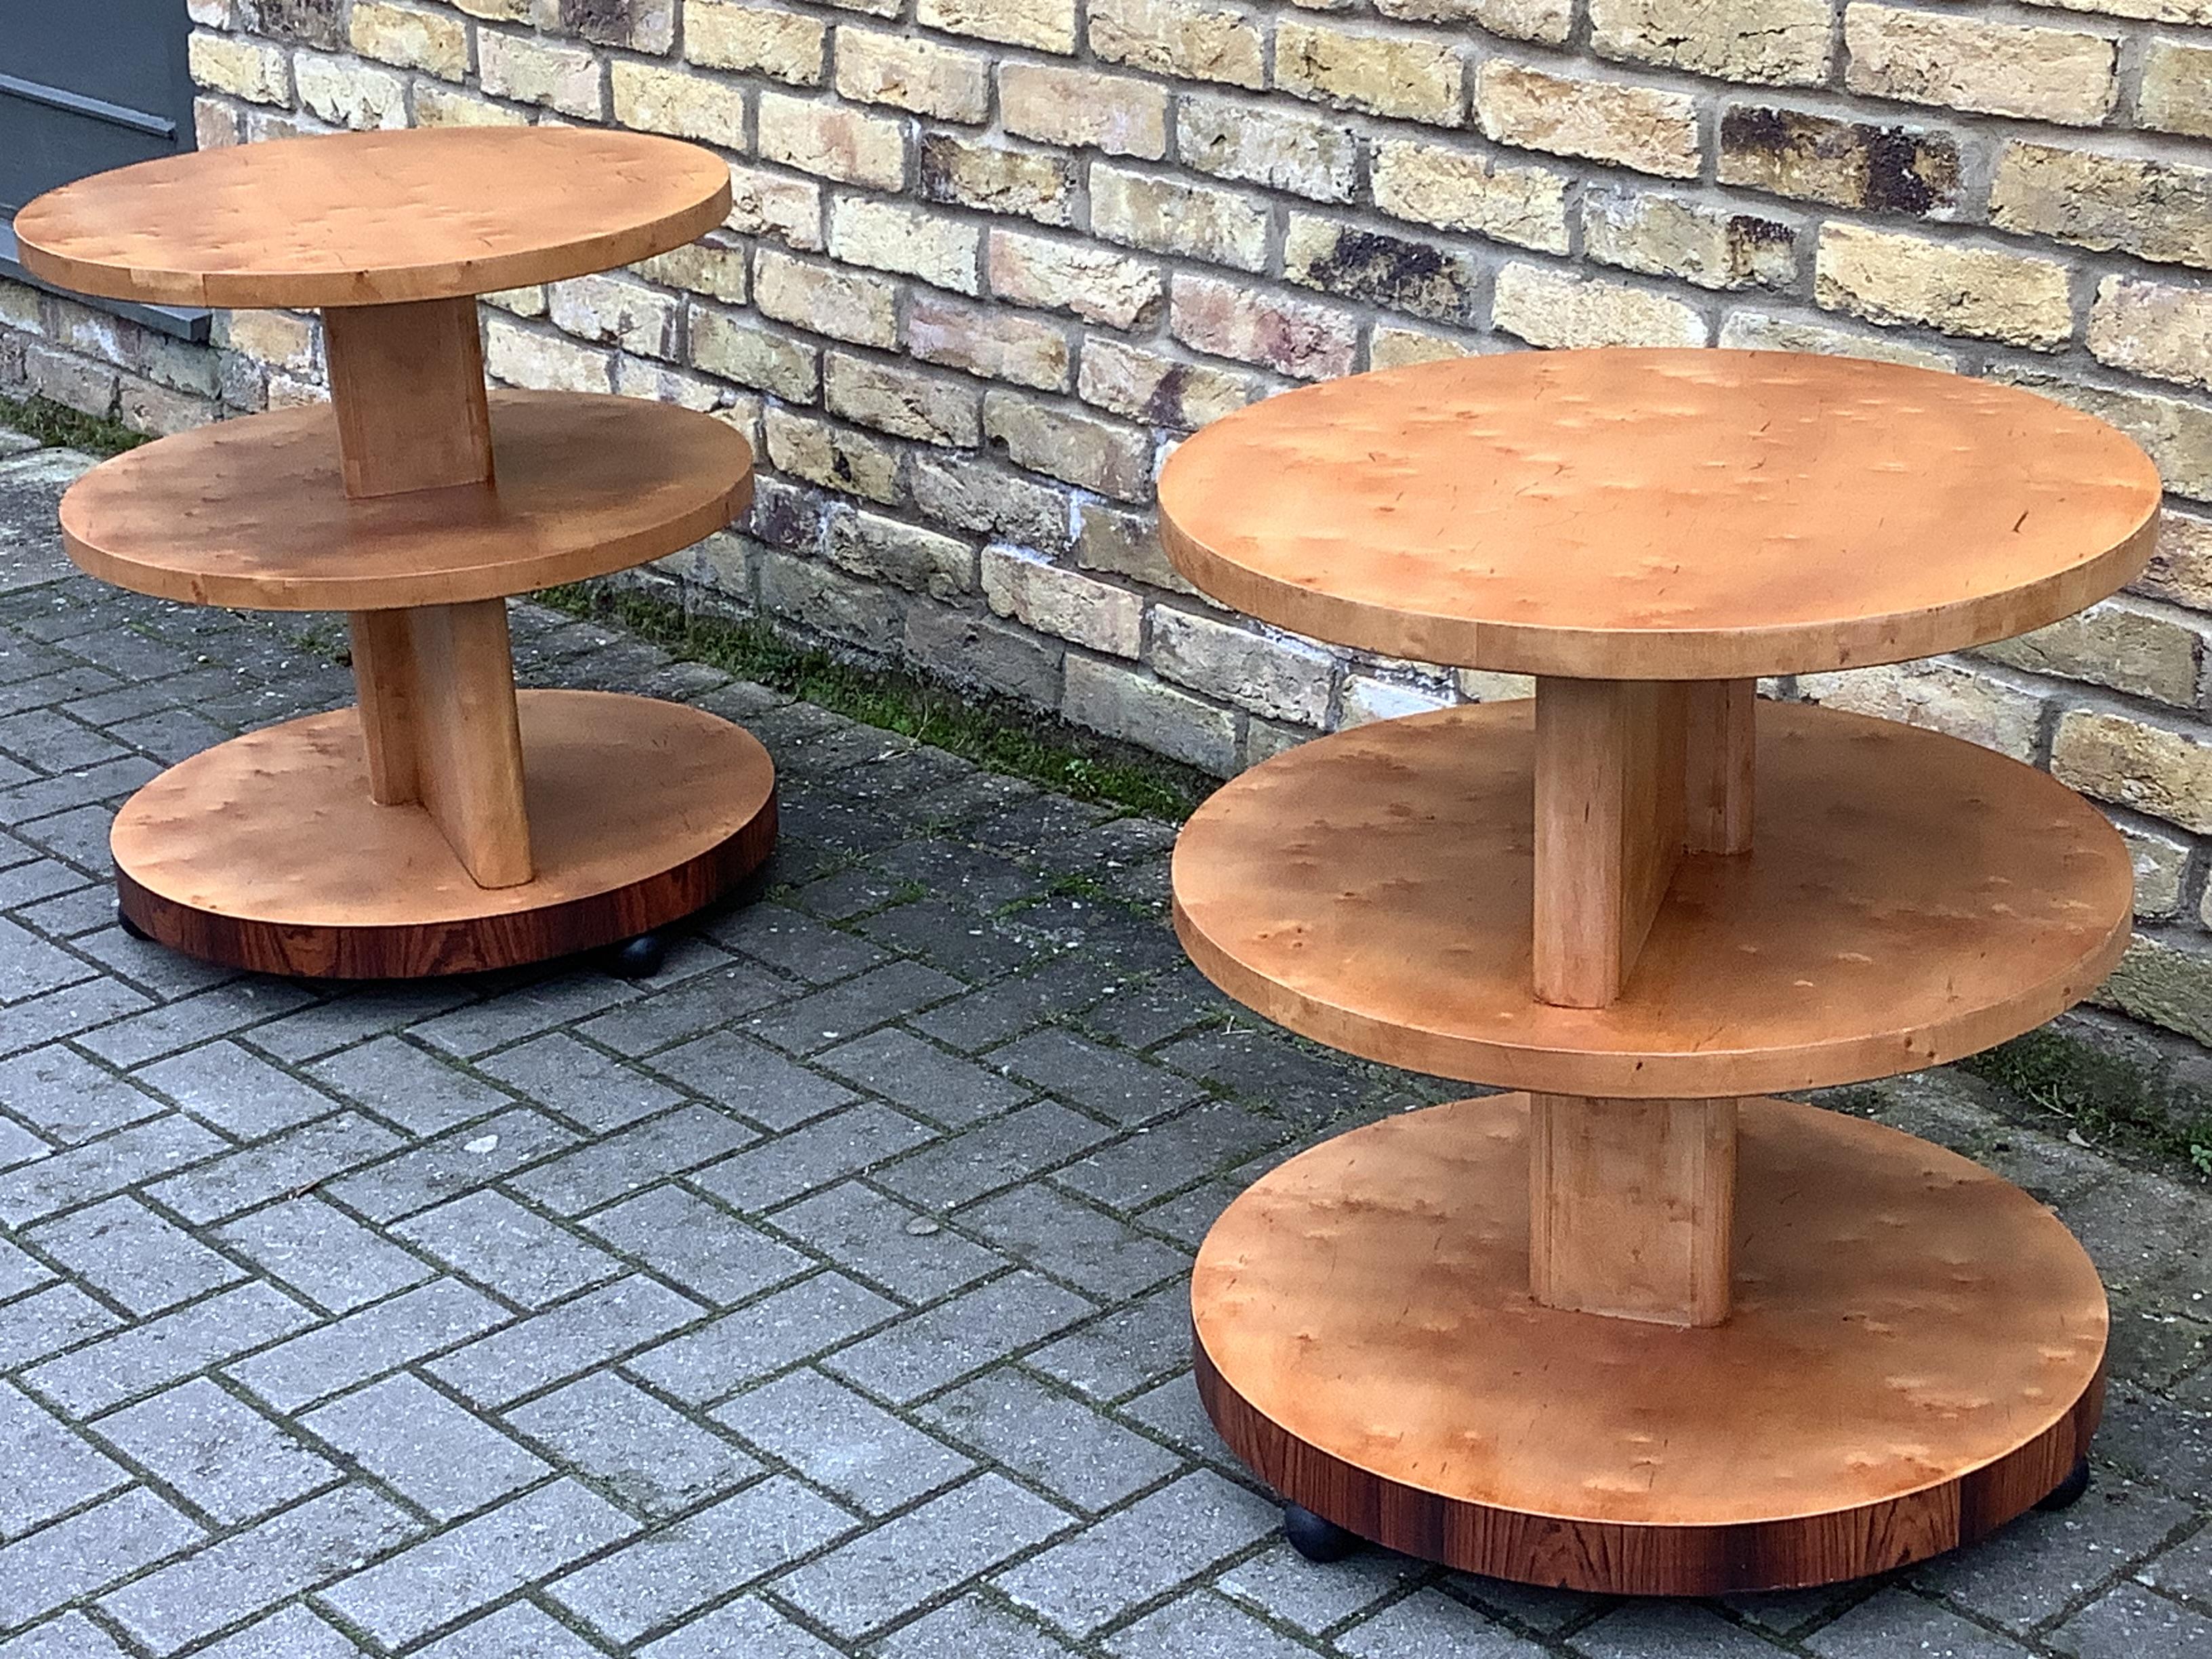 Deco pair of round side tables in Birds Eye maple